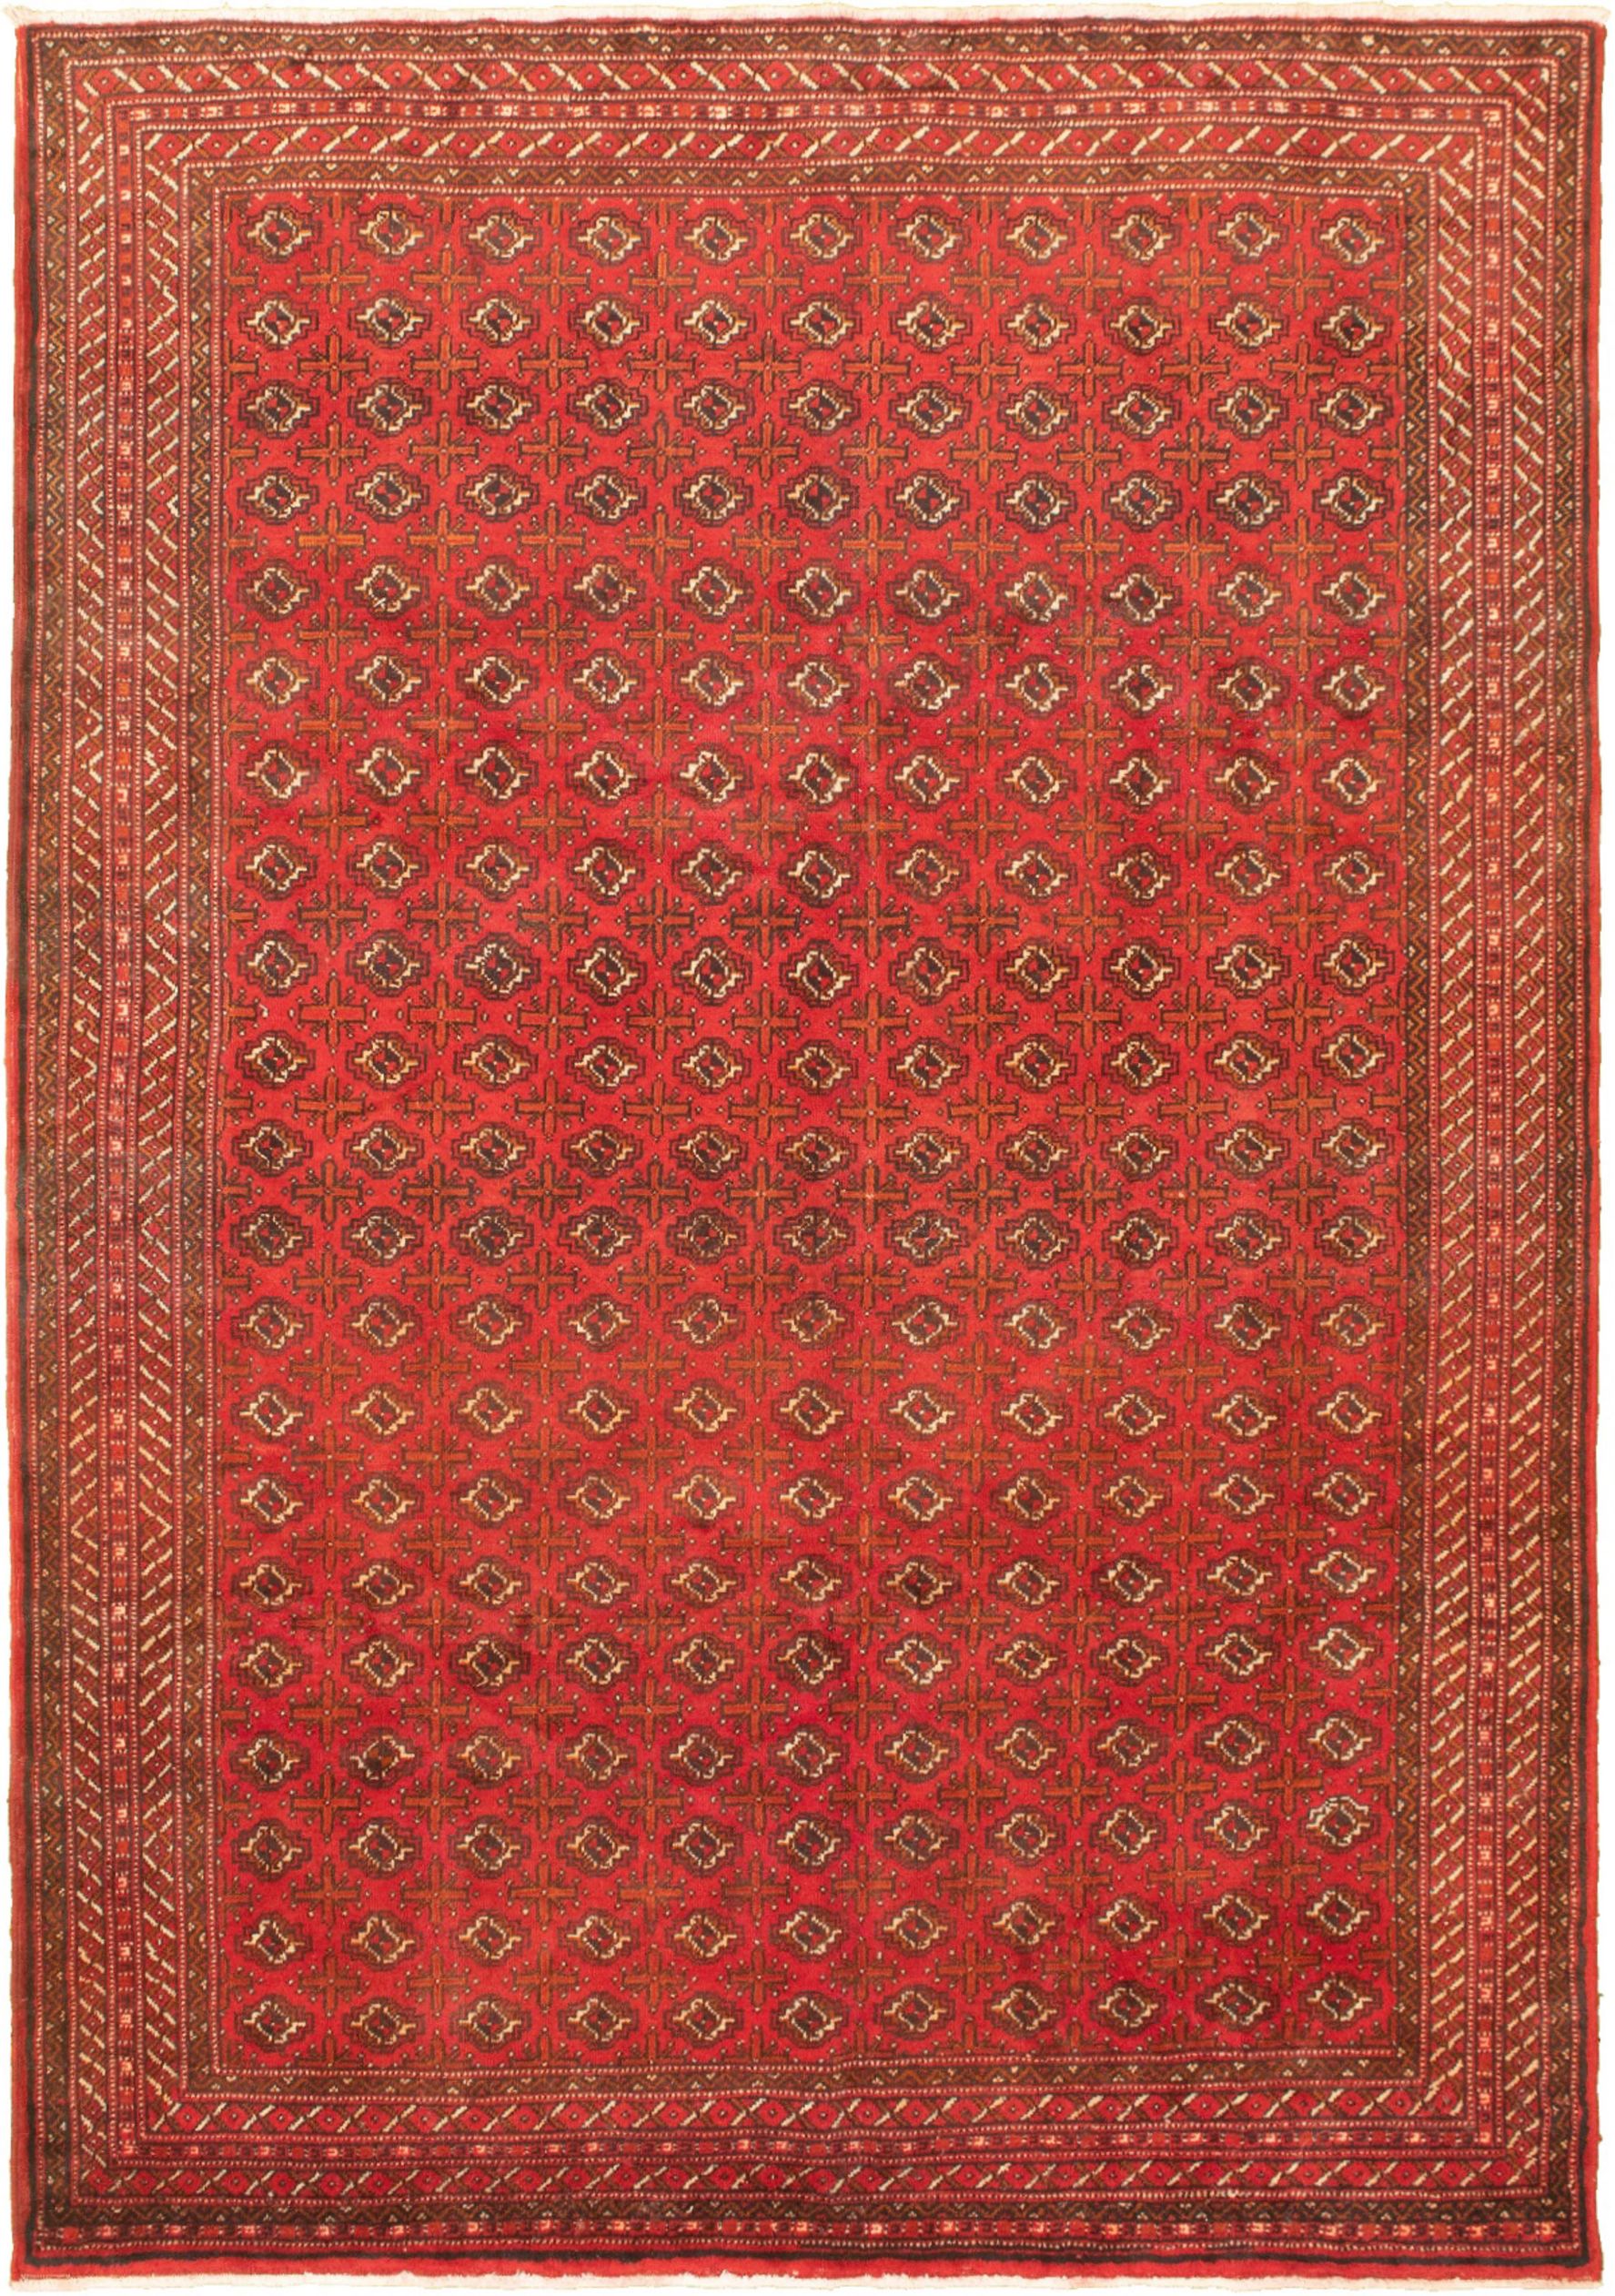 Hand-knotted Shiravan Bokhara Red Wool Rug 6'7" x 9'6"  Size: 6'7" x 9'6"  